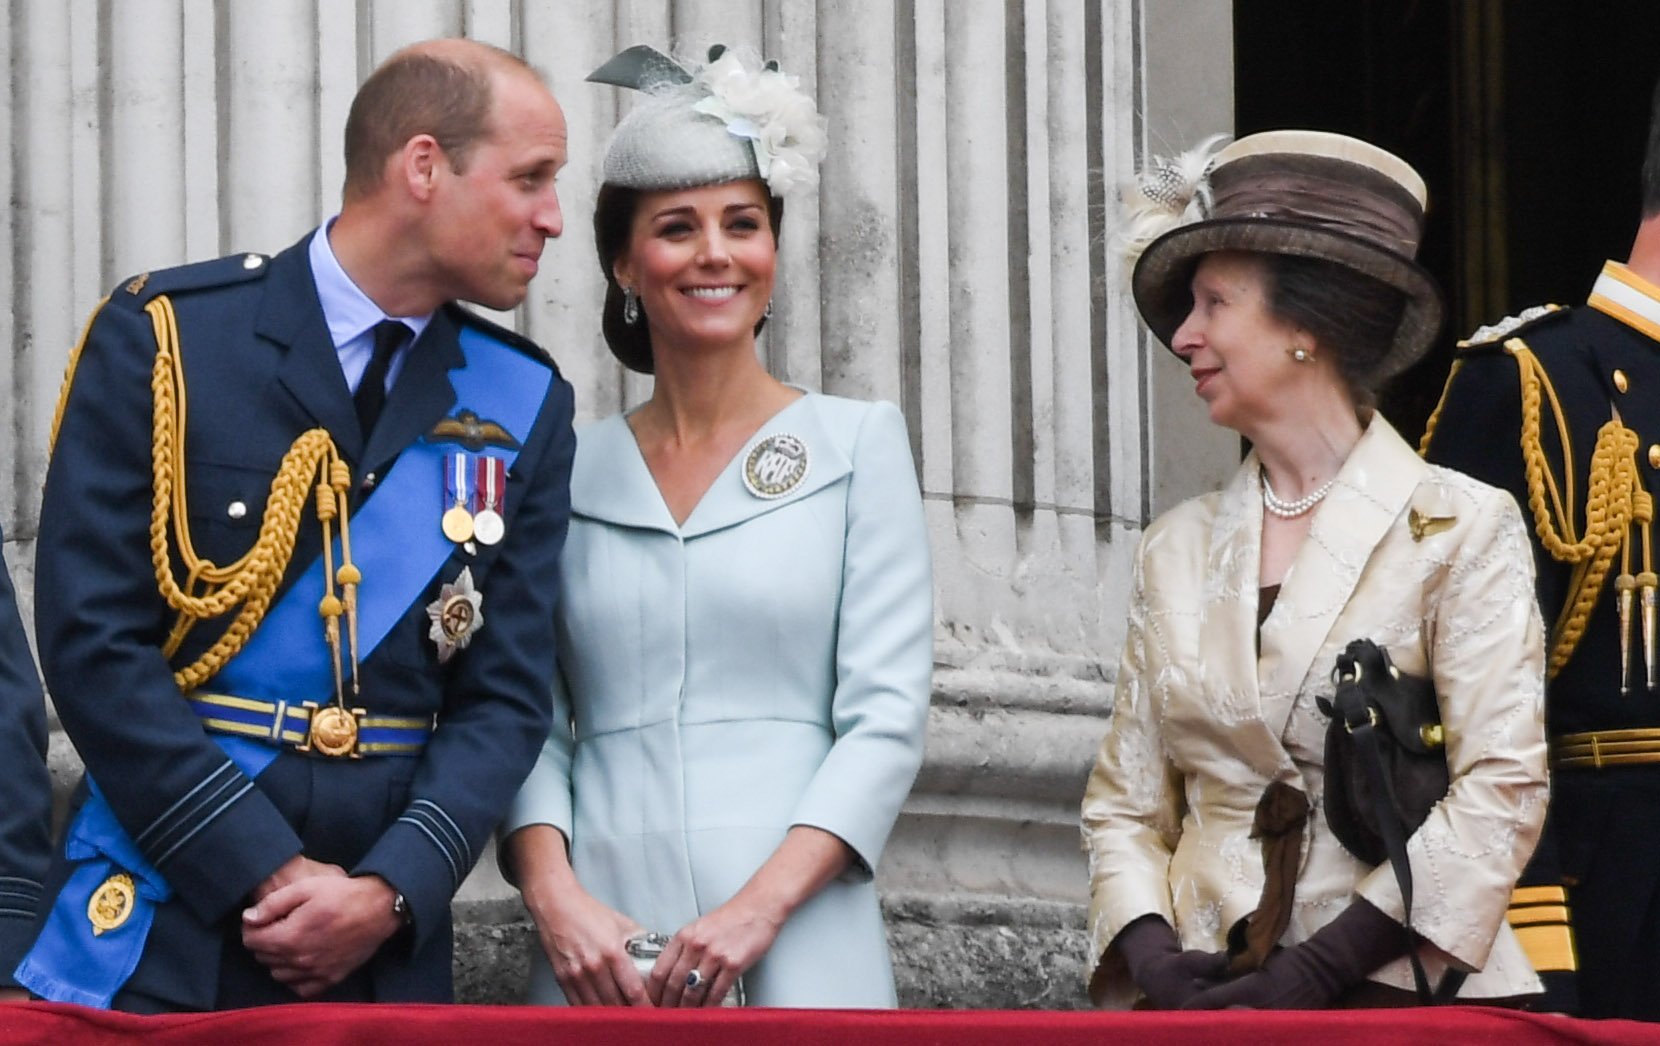 Prince William, Kate Middleton, and Princess Ann, some of the most generous royal family members, laughing